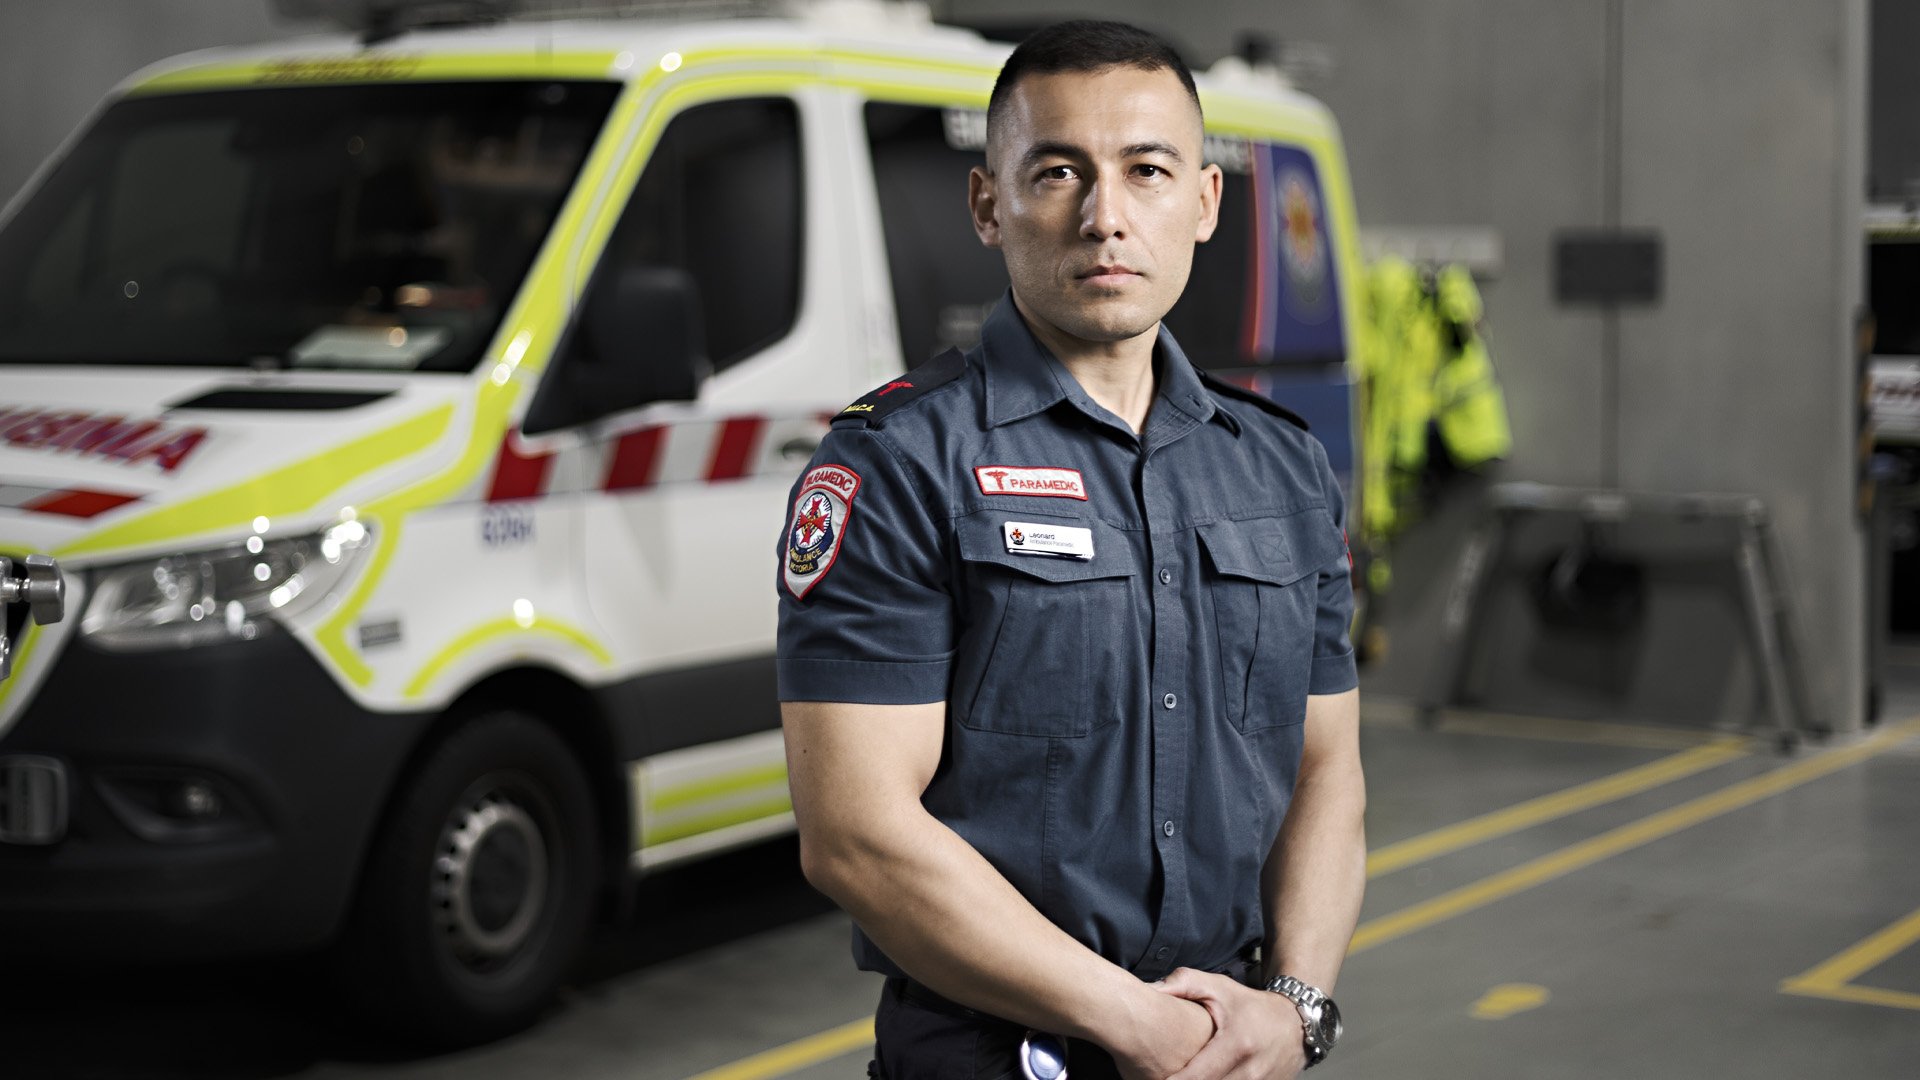 A male paramedic in uniform standing in front of an ambulance